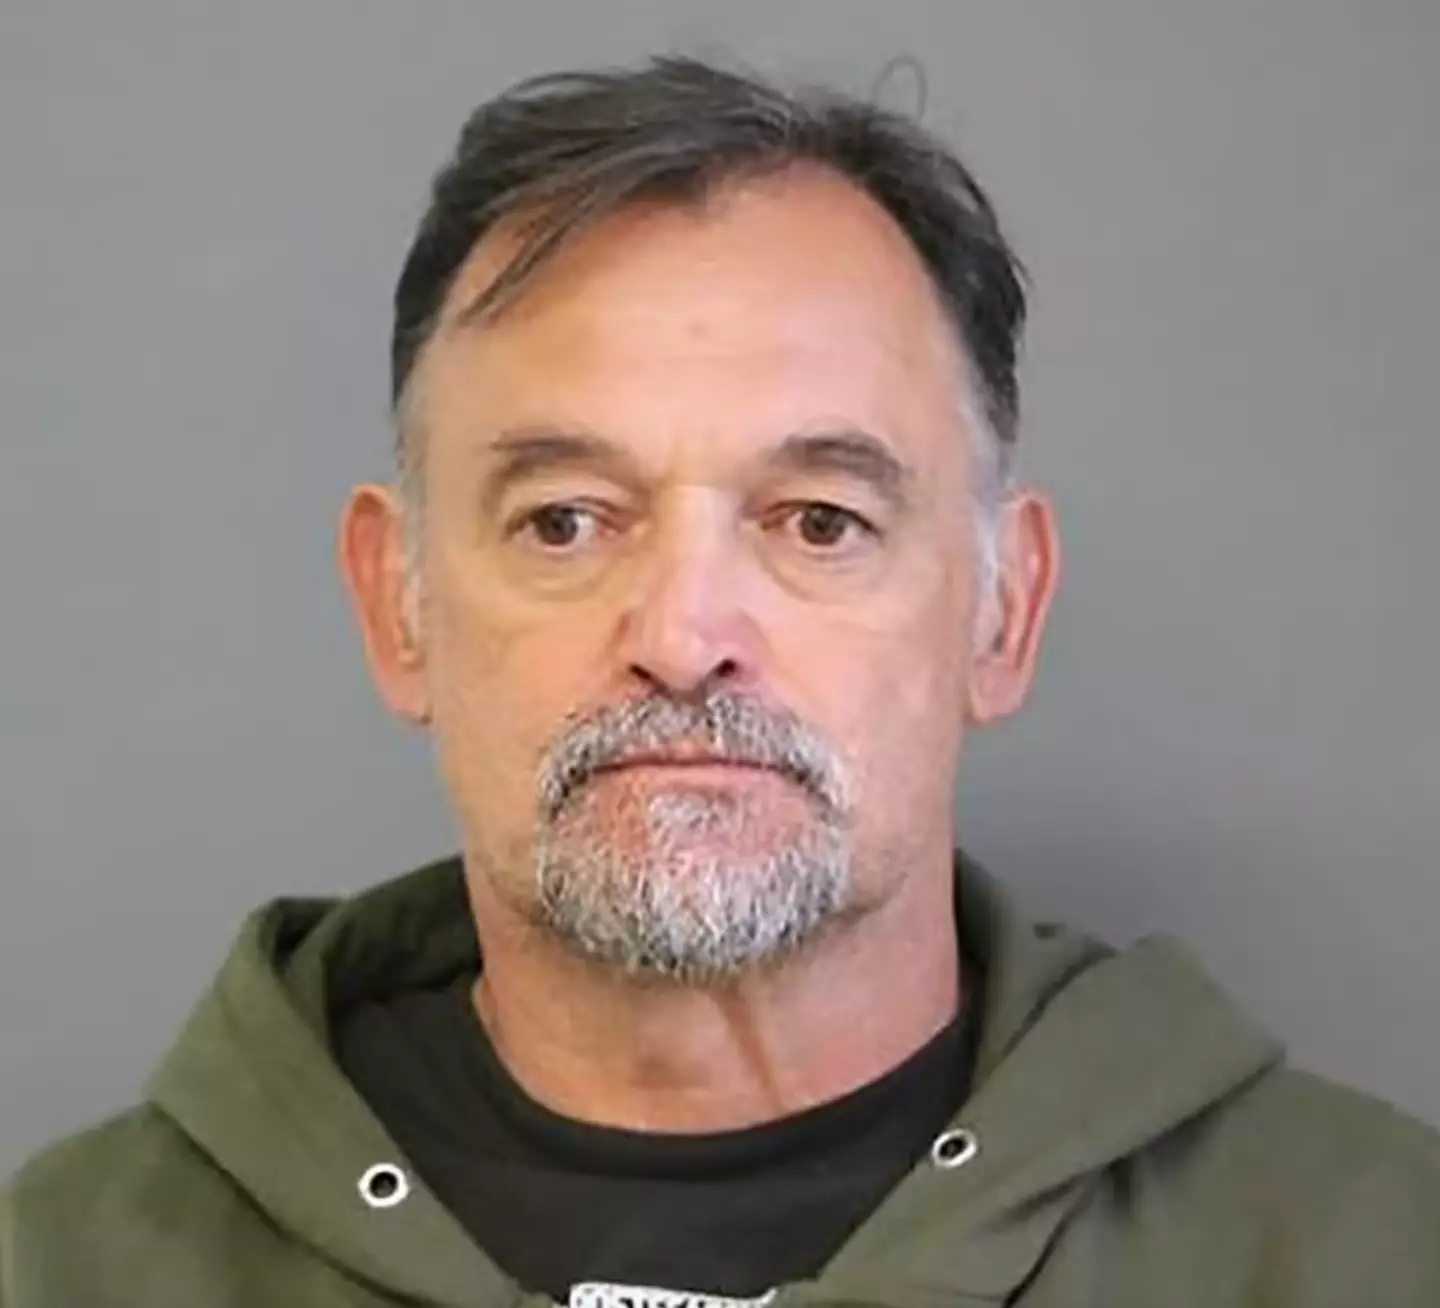 Randy Frank Davila was arrested after walking out onto the wing of a plane.